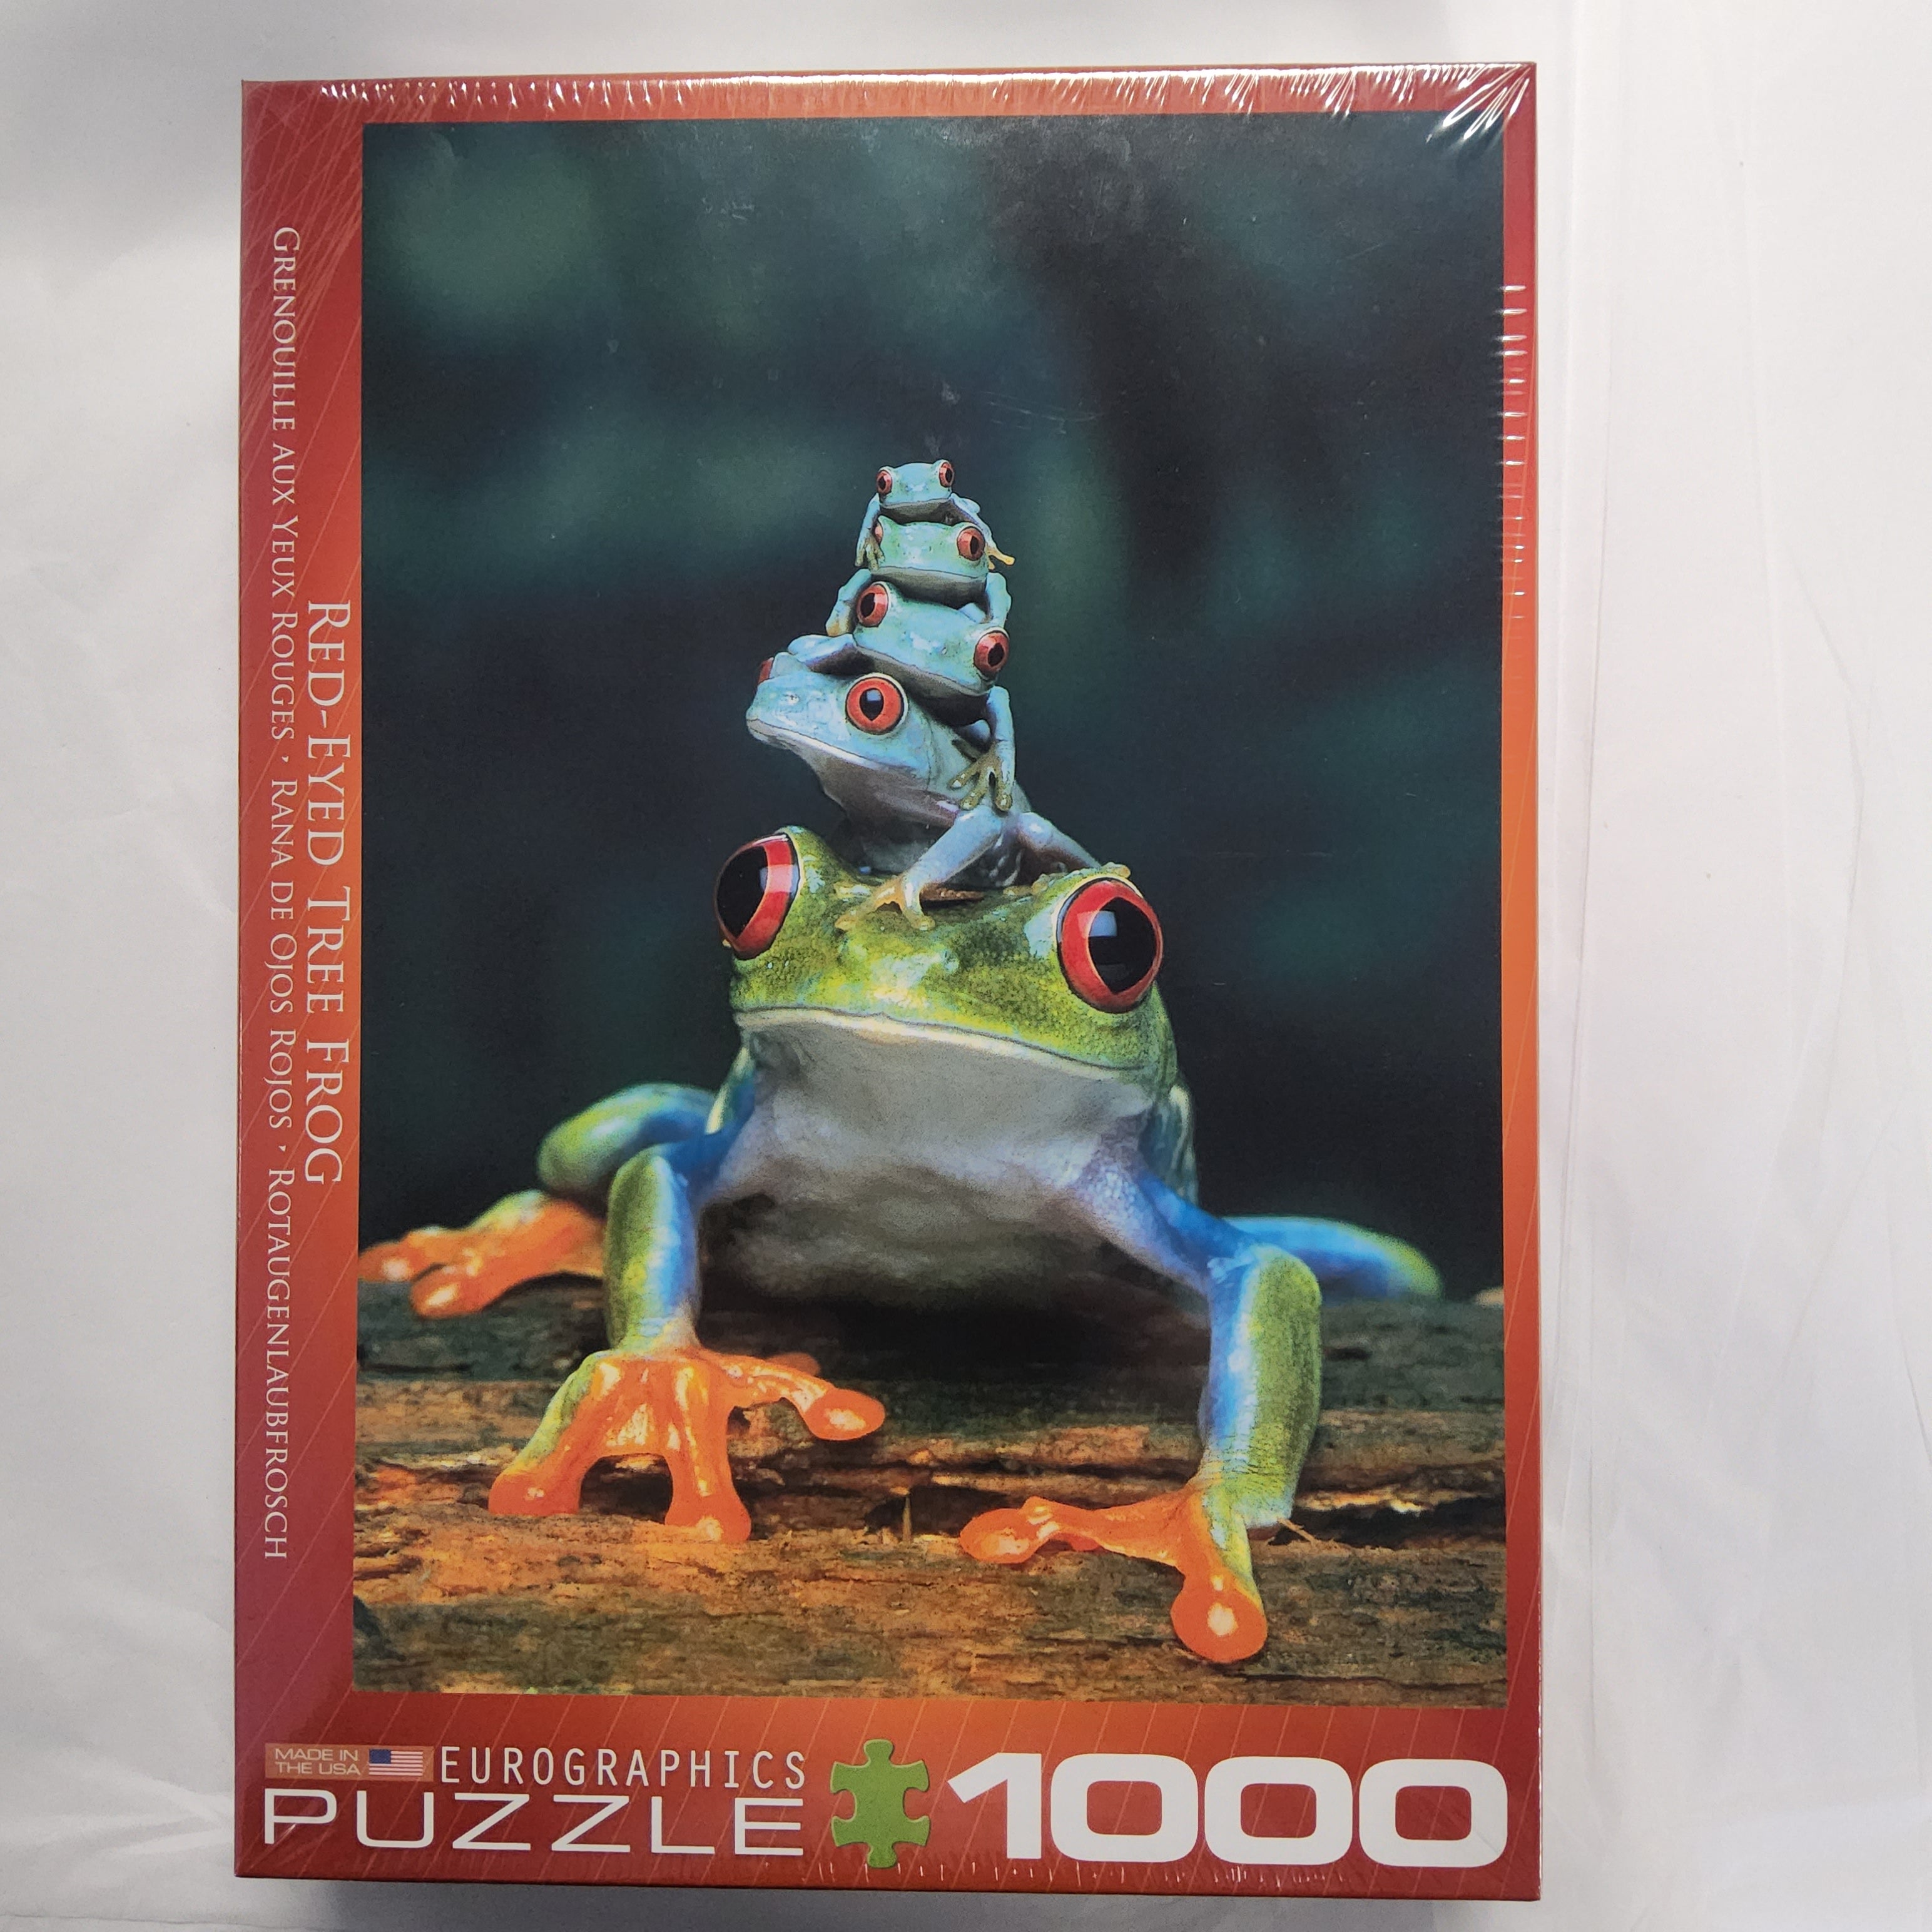 Eurographics Puzzle - Red-Eyed Tree Frog - 1000 pieces - 6000-3004